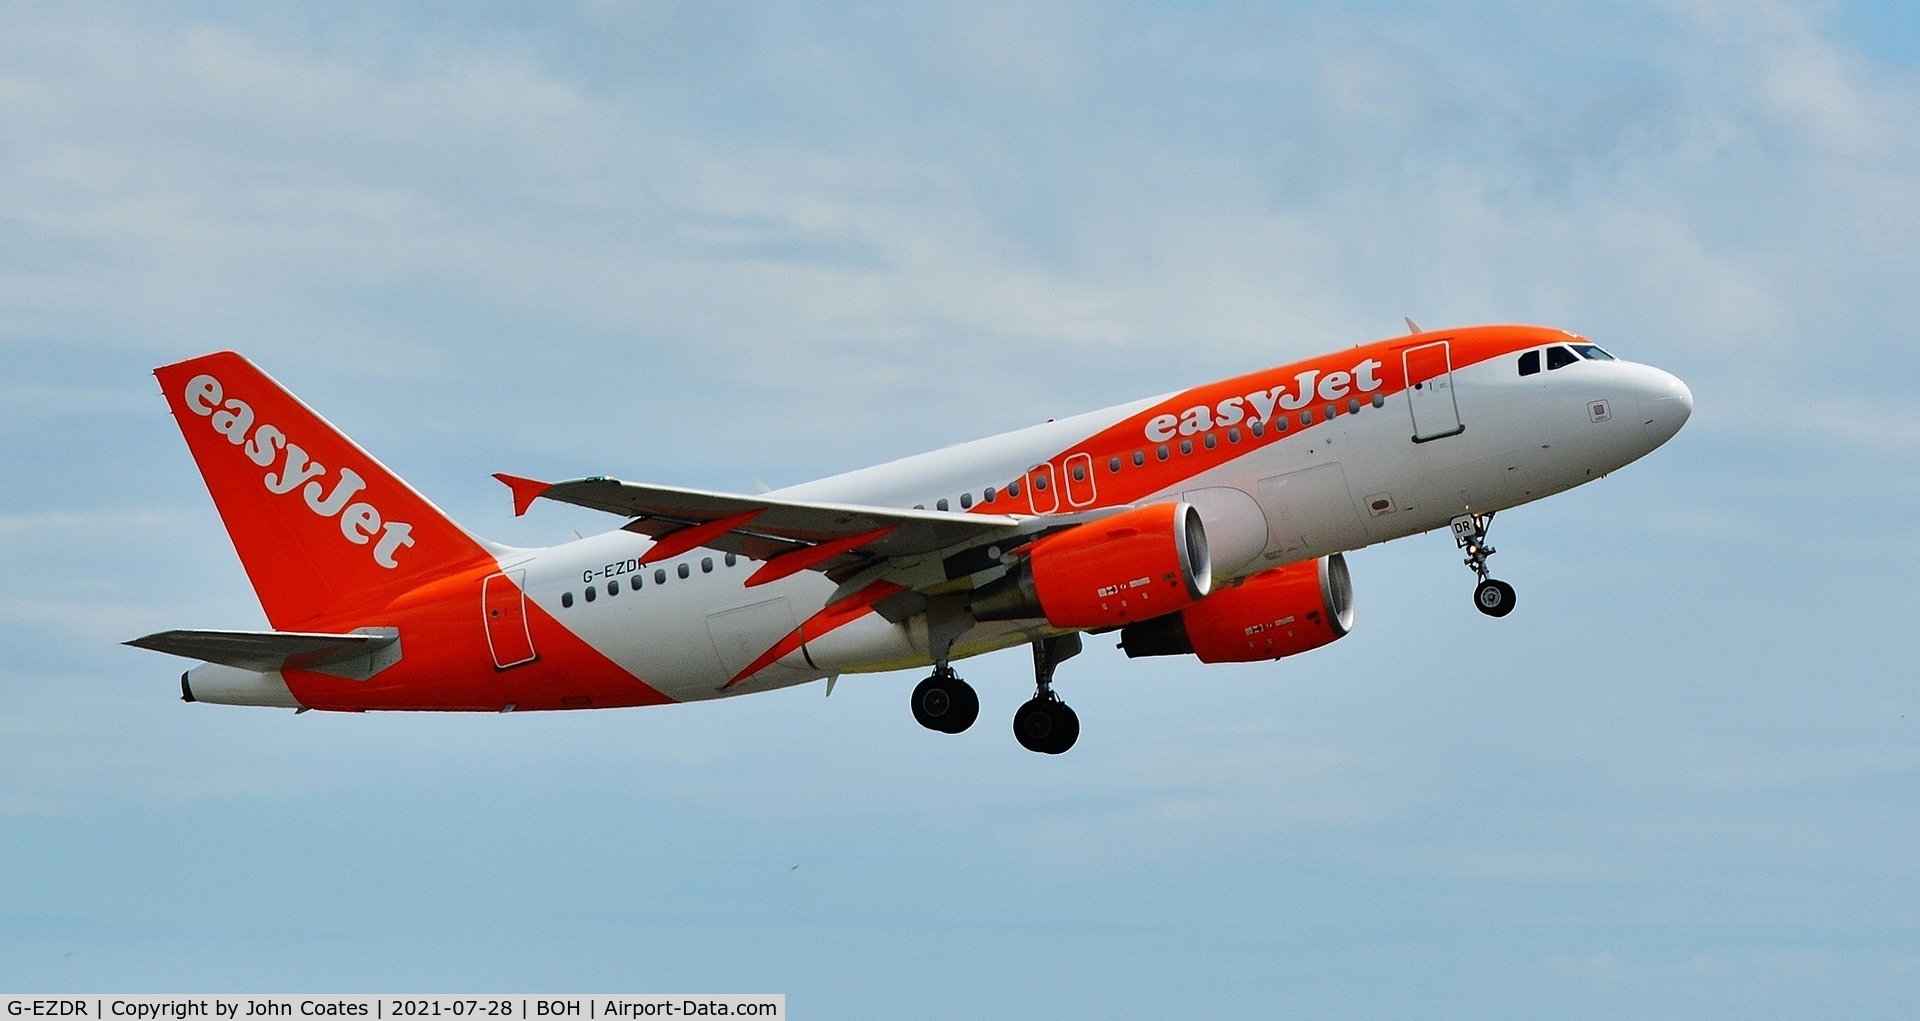 G-EZDR, 2008 Airbus A319-111 C/N 3683, Climbing from 26